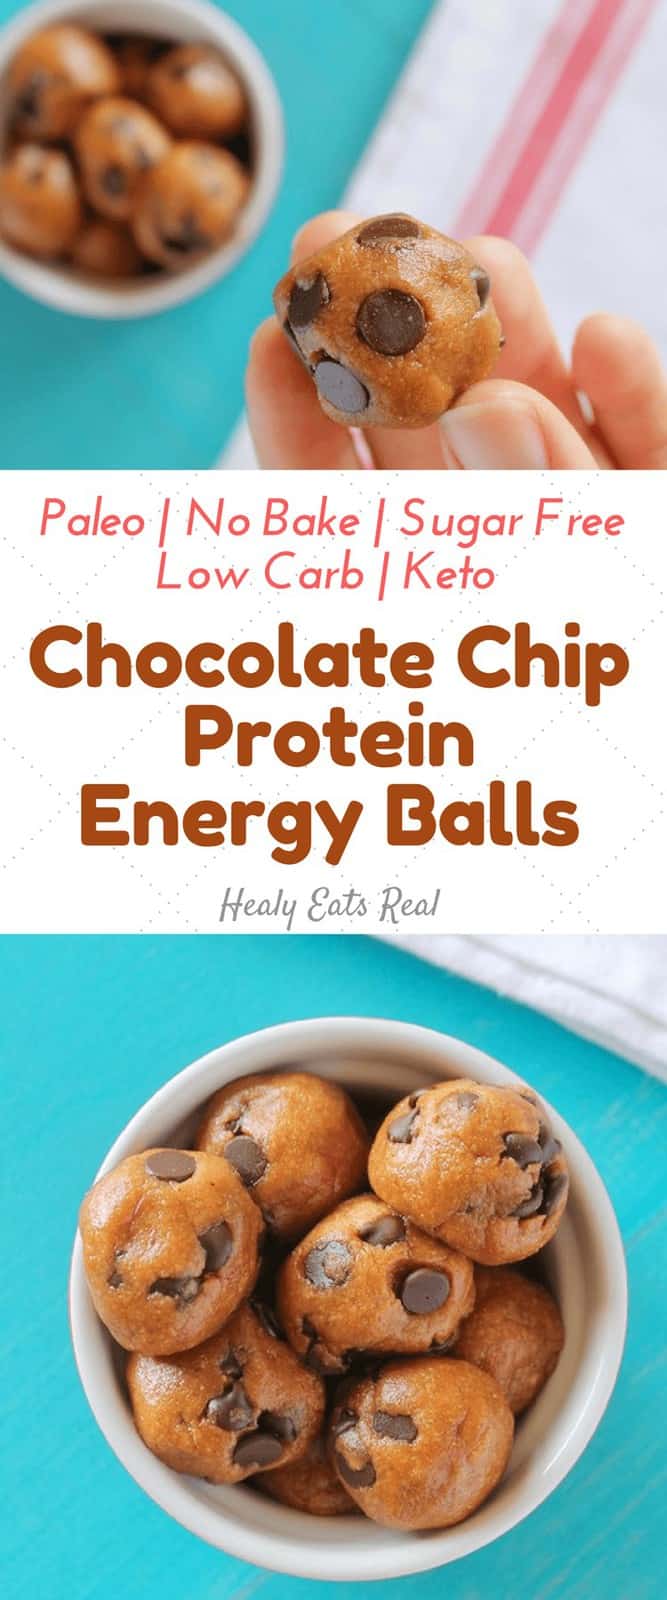 Chocolate Chip Protein Energy Balls (Paleo, Low Carb, No Bake)